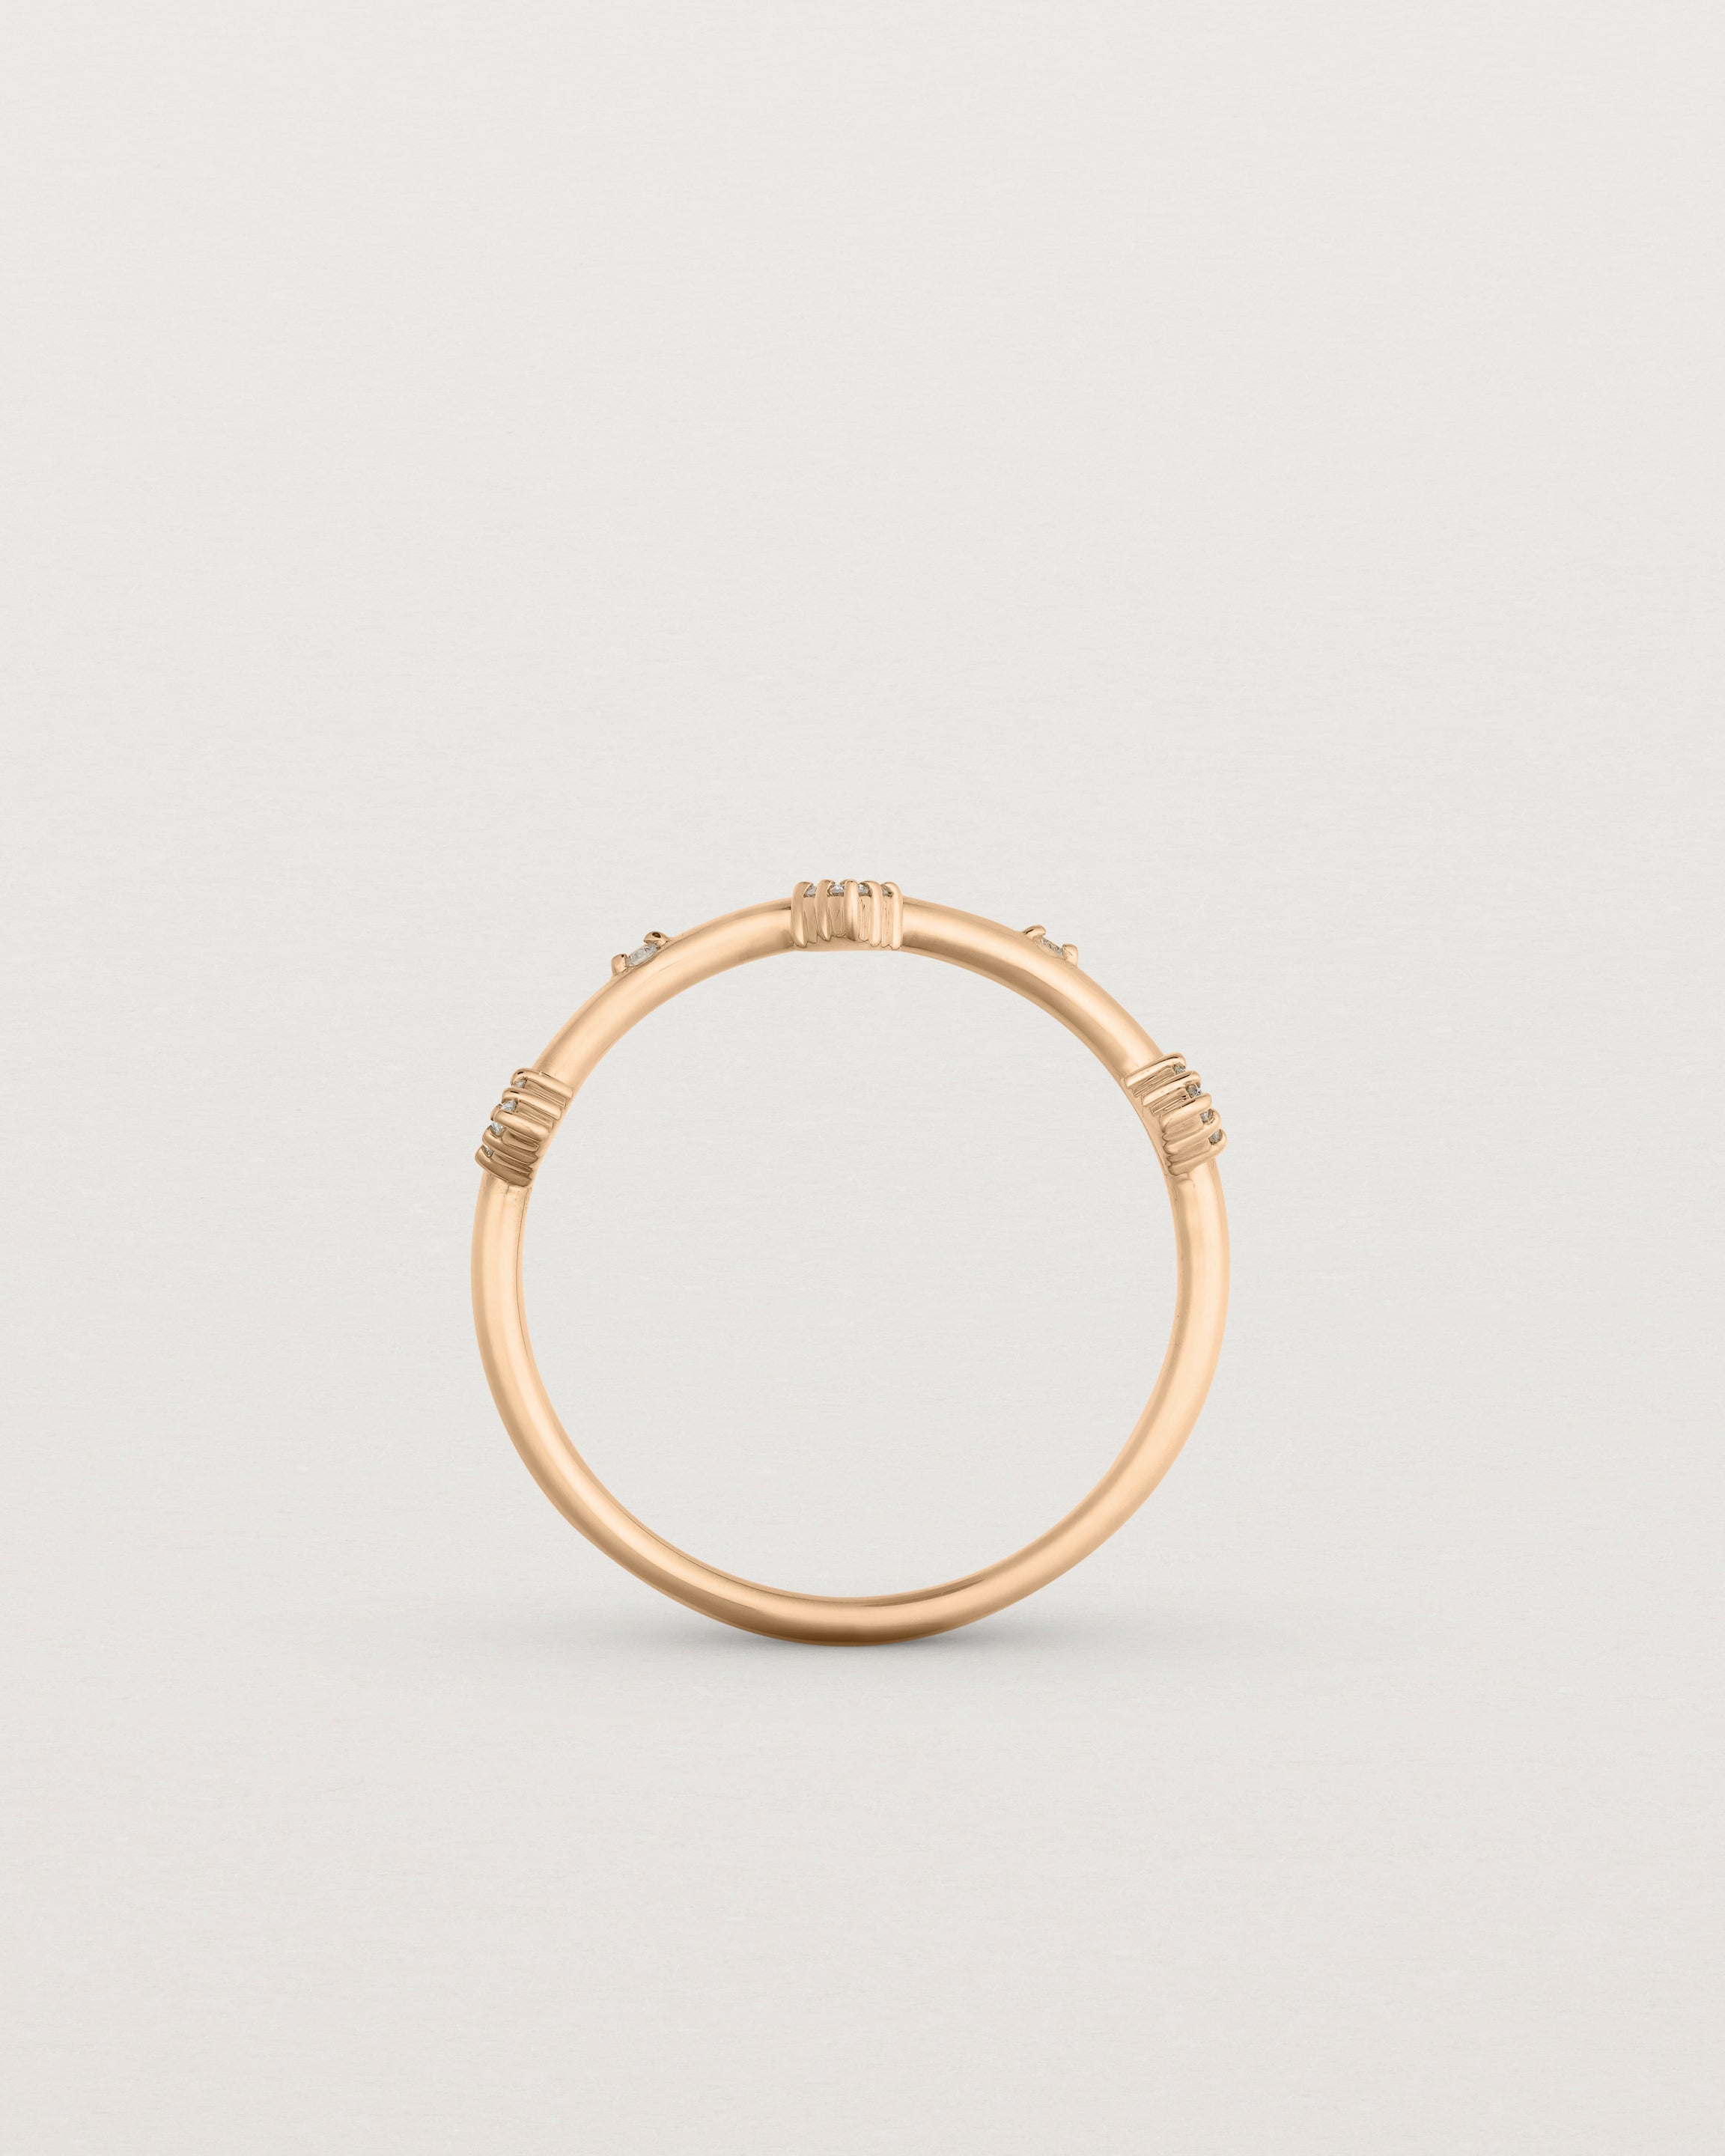 Standing view of the Belle Ring | Diamonds in rose gold.